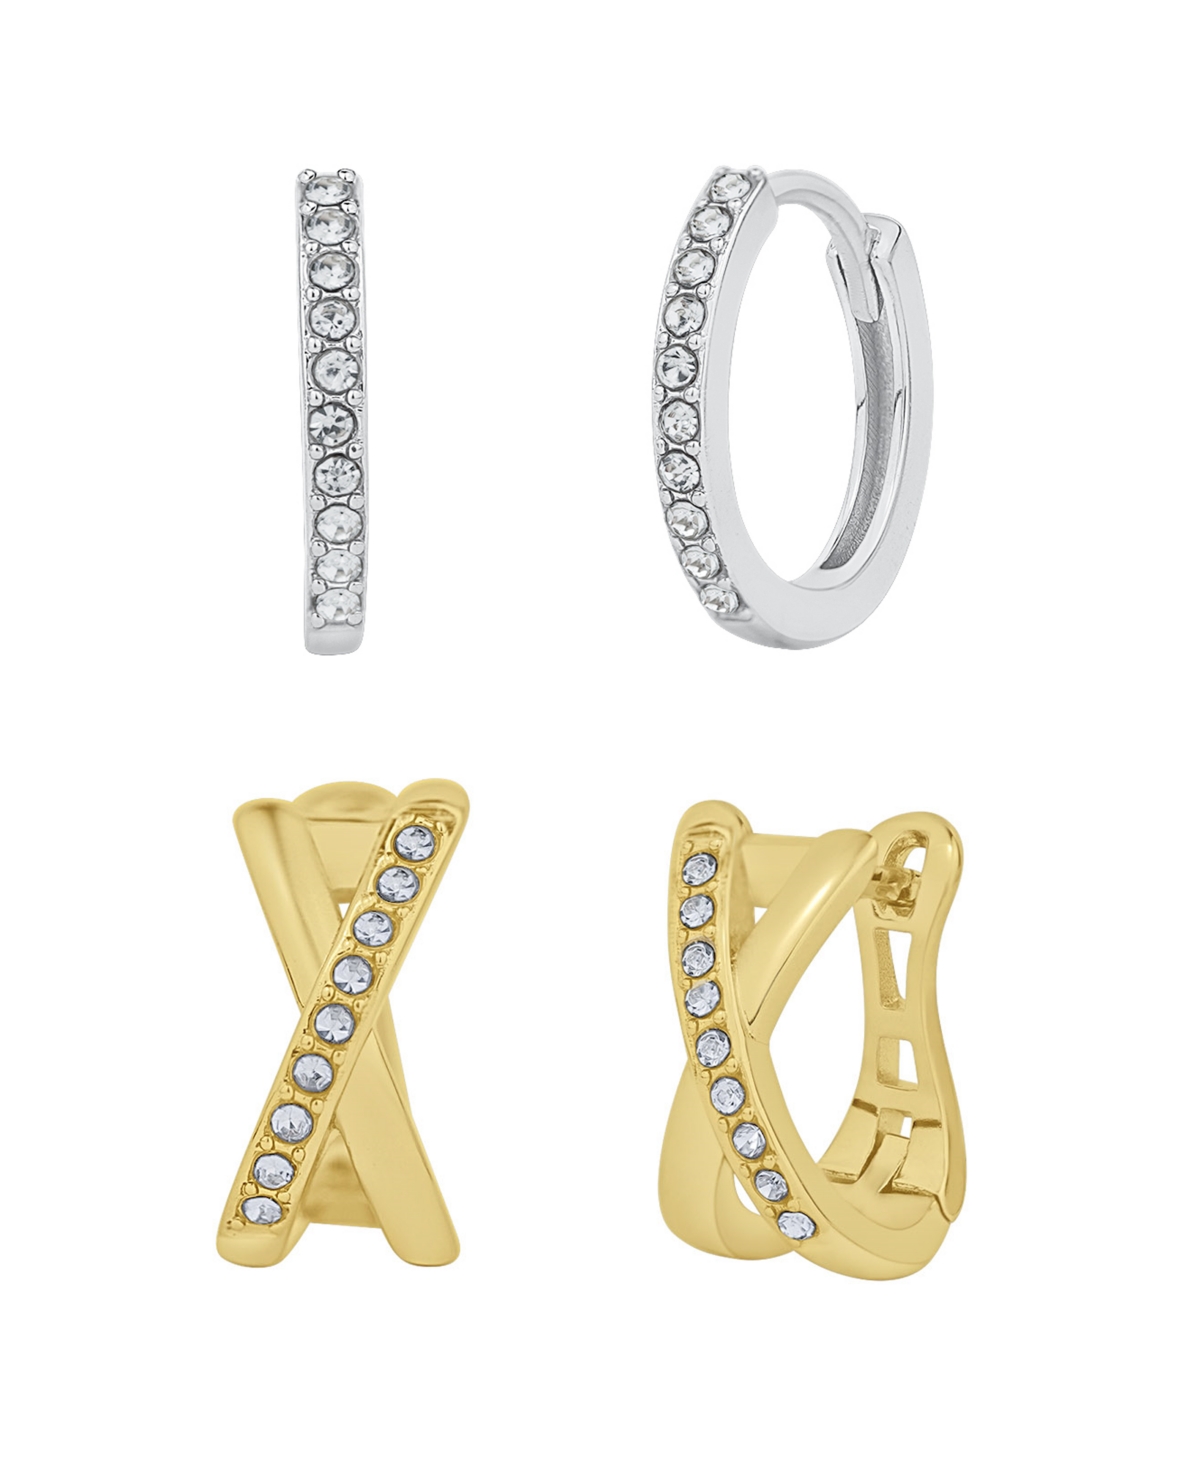 Clear Crystal Stone Hoop Earring Set - Gold Plated and Silver Plated